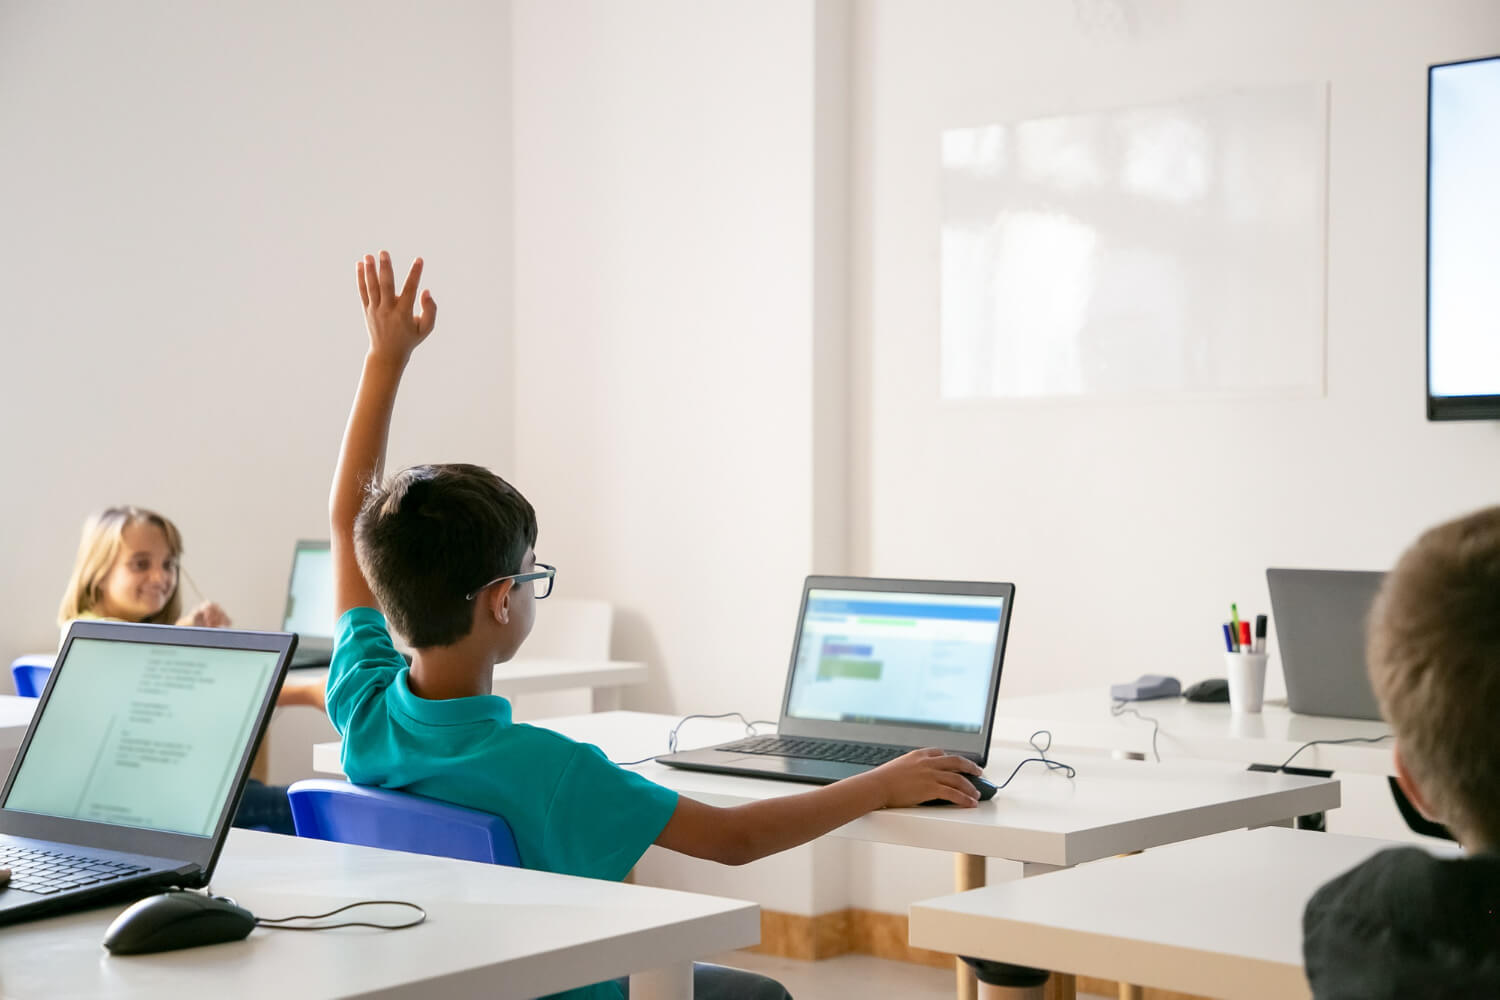 5 Engaging Ways to Teach Kids Coding